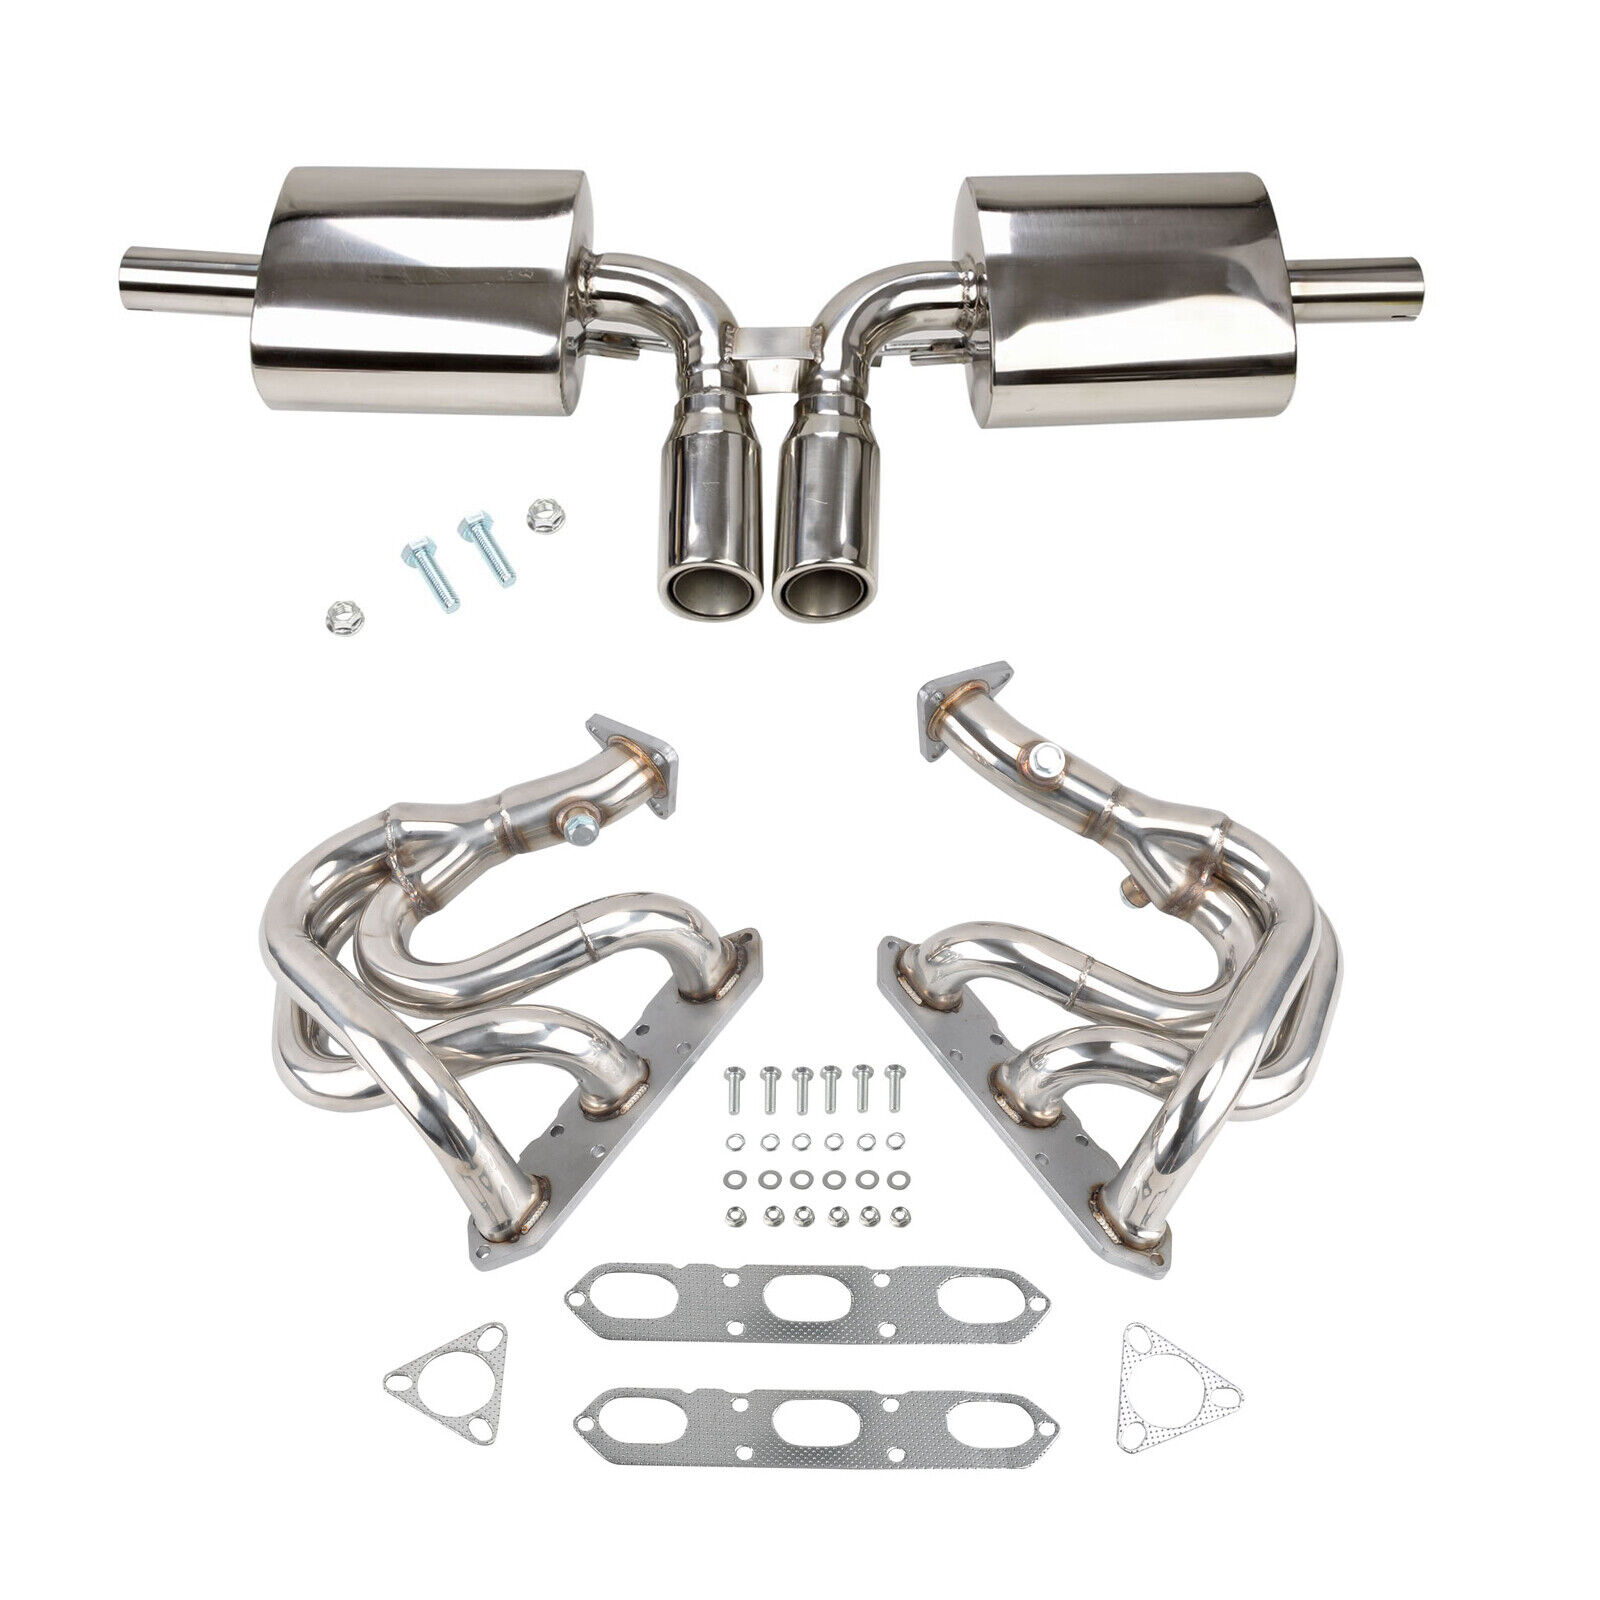 STAINLESS CATBACK EXHAUST SYSTEM KITS FOR 96-04 PORSCHE BOXSTER/S 986 2.5L 2.7L